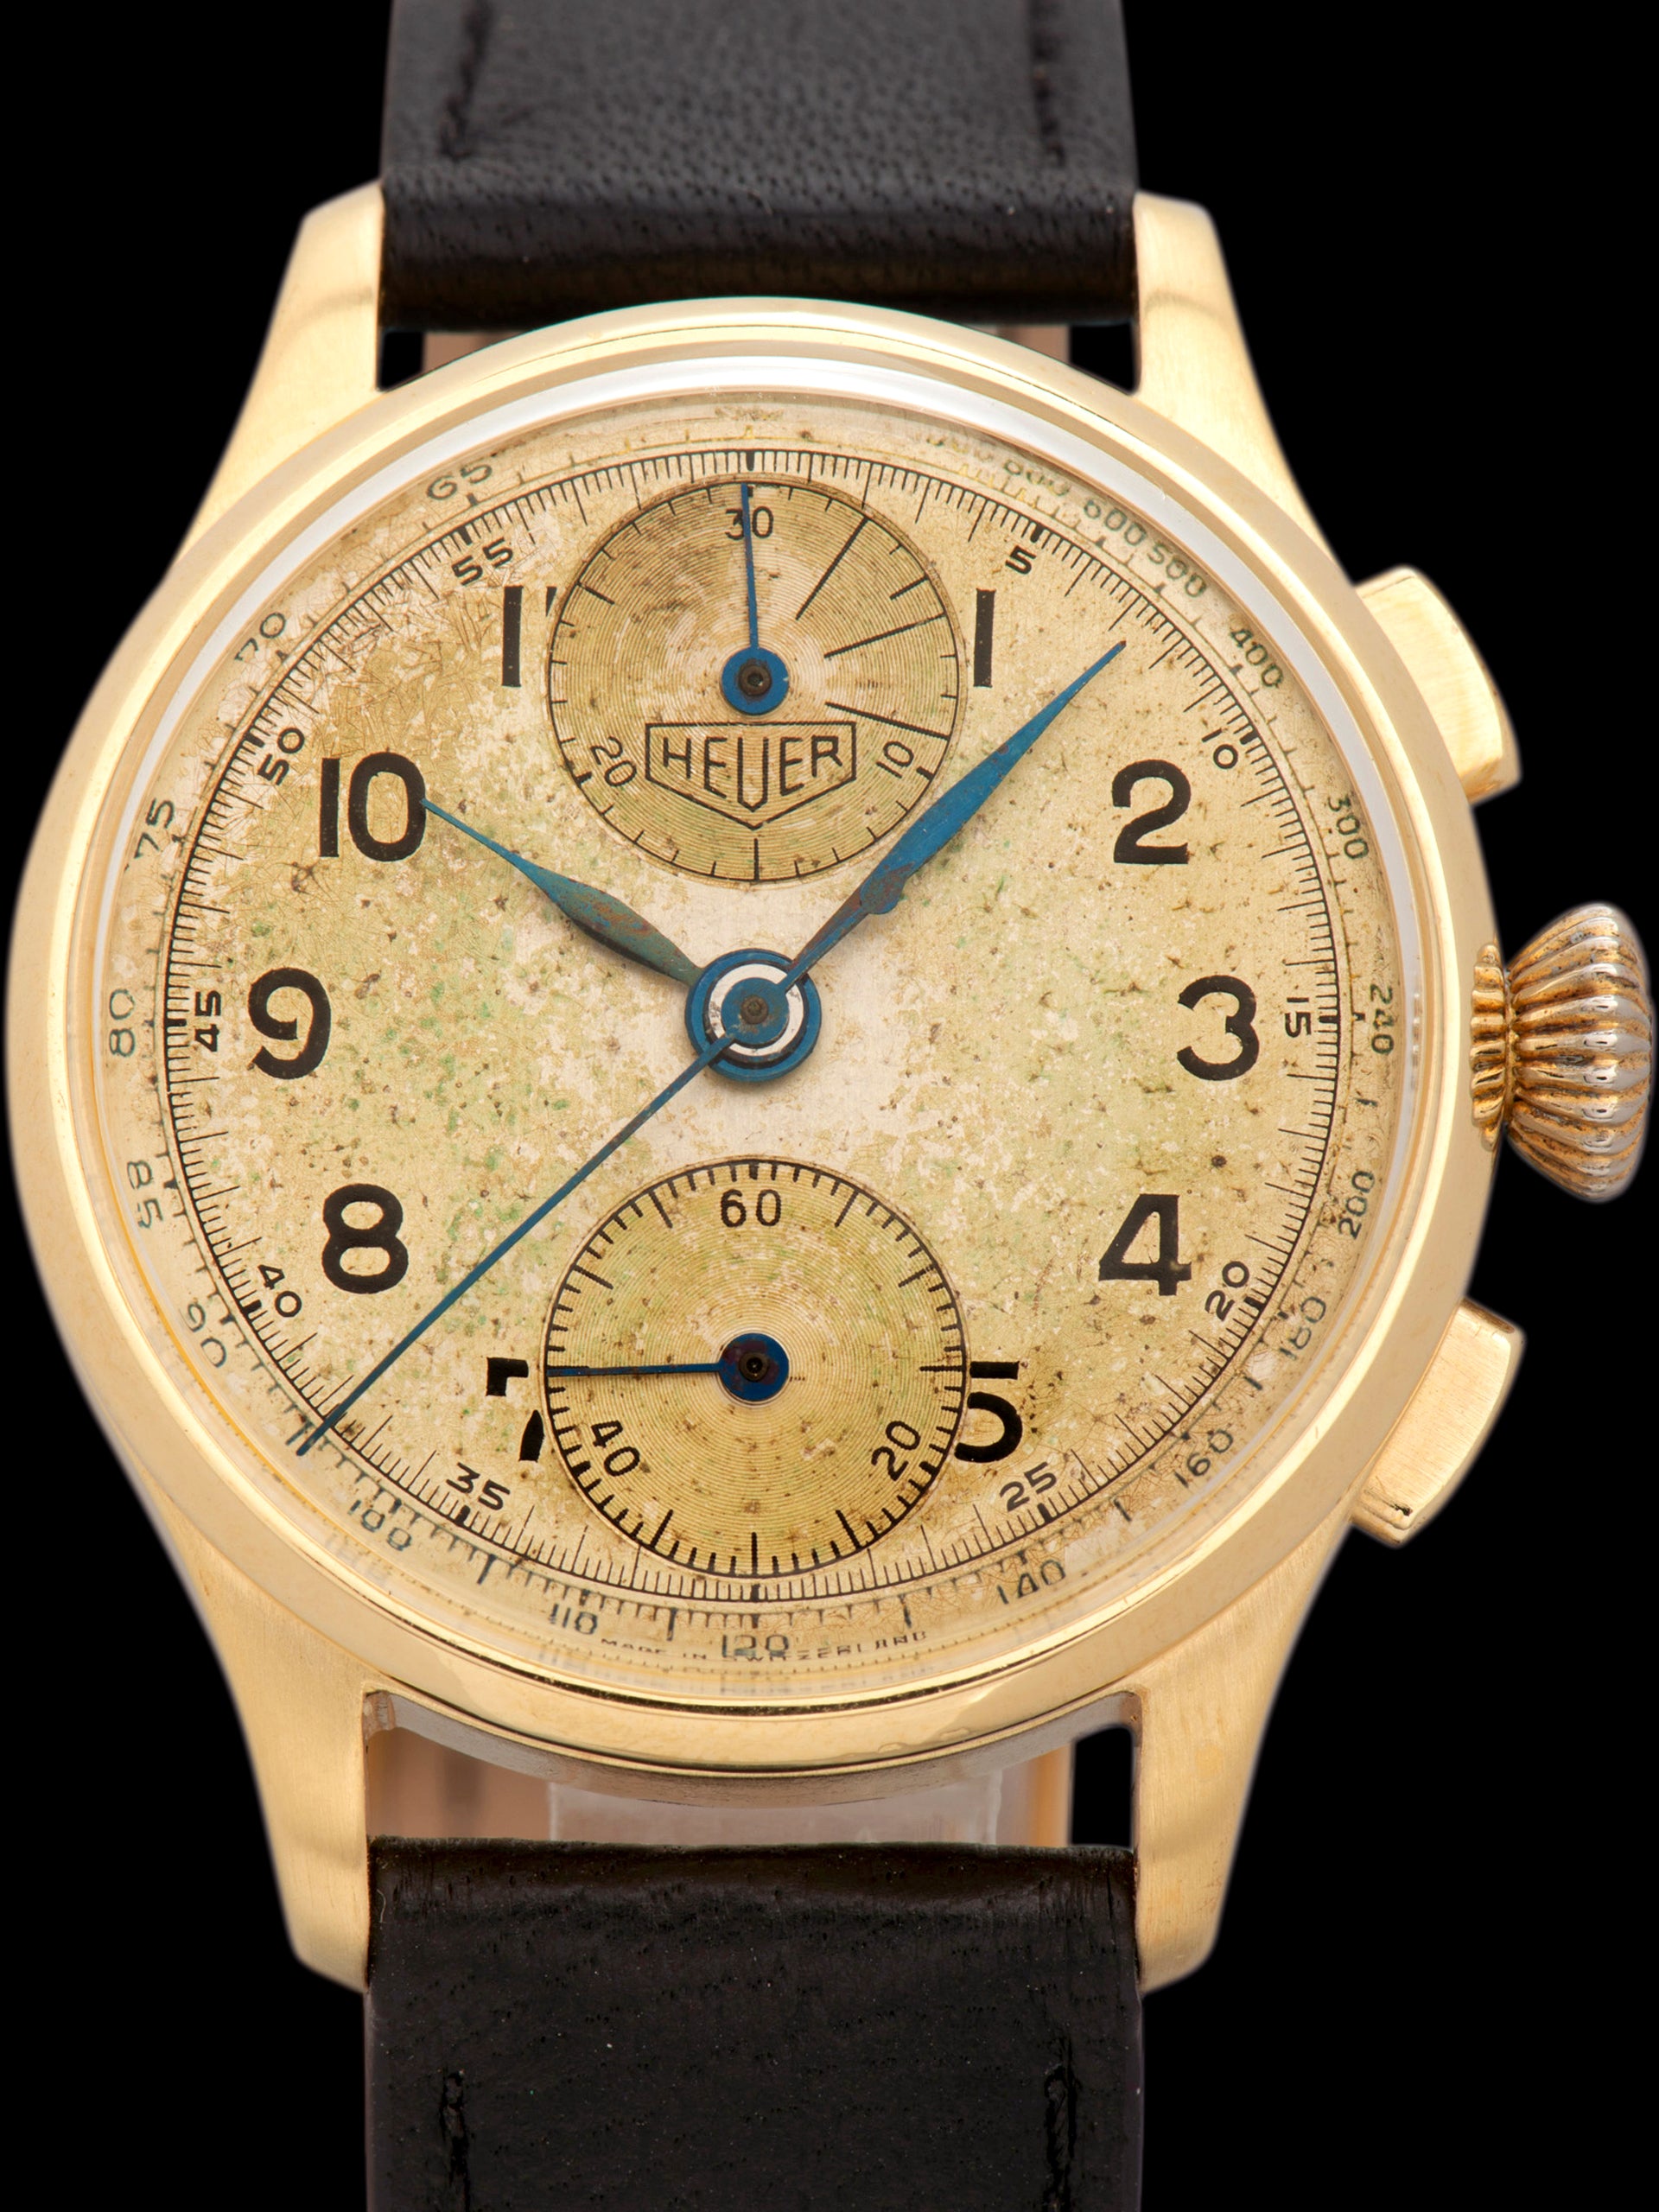 1950s Heuer Chronograph "Gold Plated"